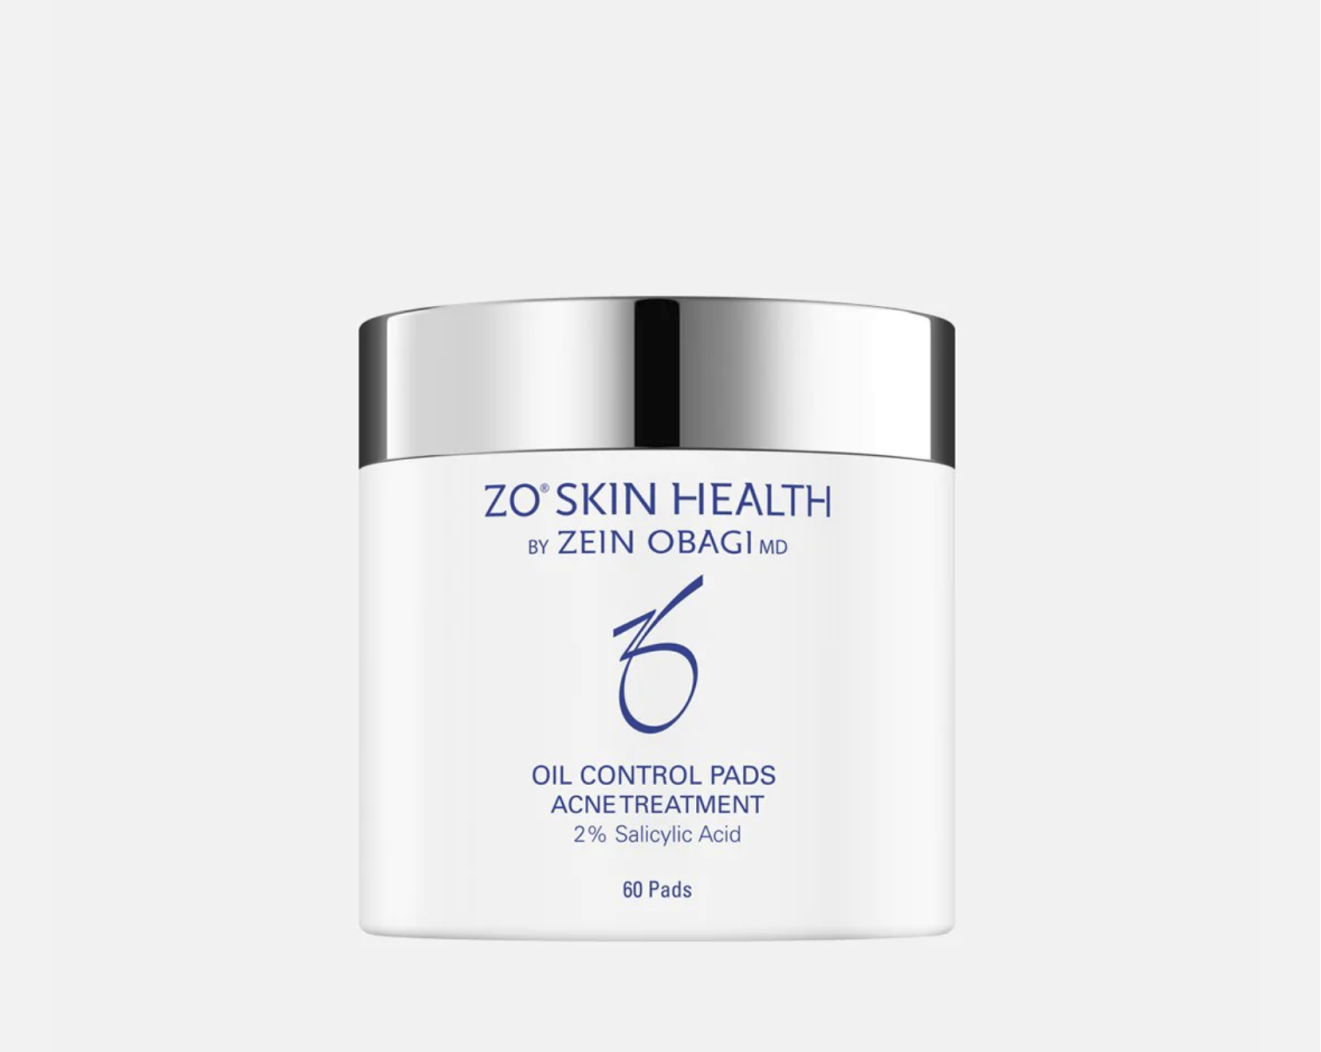 Oil Control Pads - Acne treatment by ZO